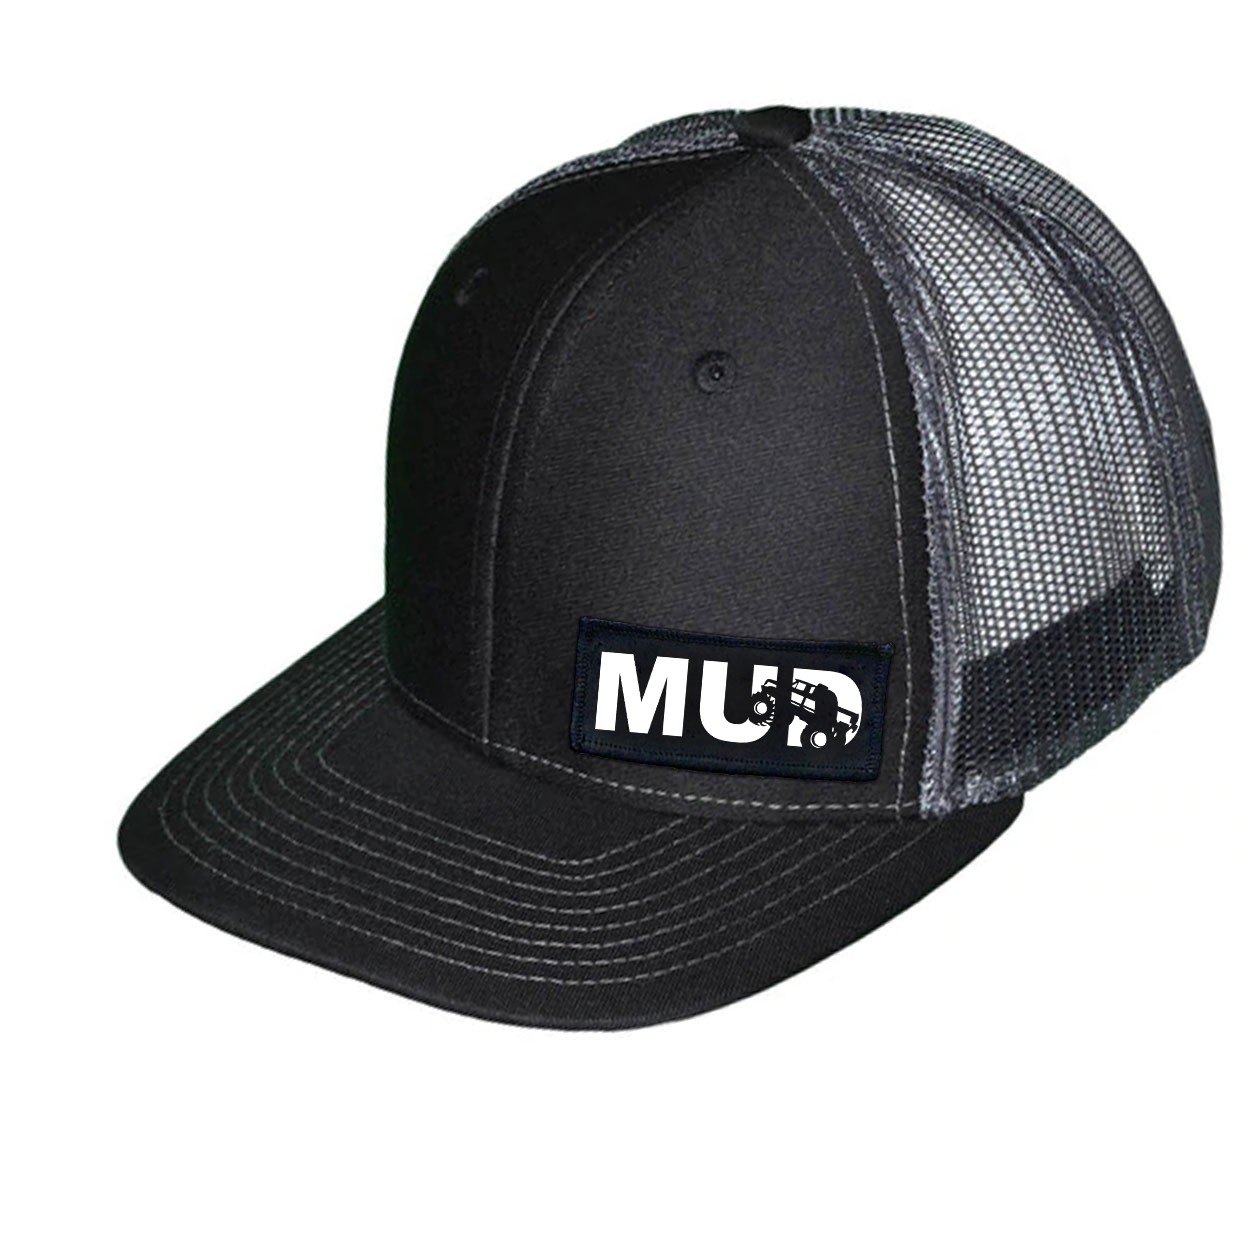 Mud Truck Logo Night Out Woven Patch Snapback Trucker Hat Black/Charcoal (White Logo)